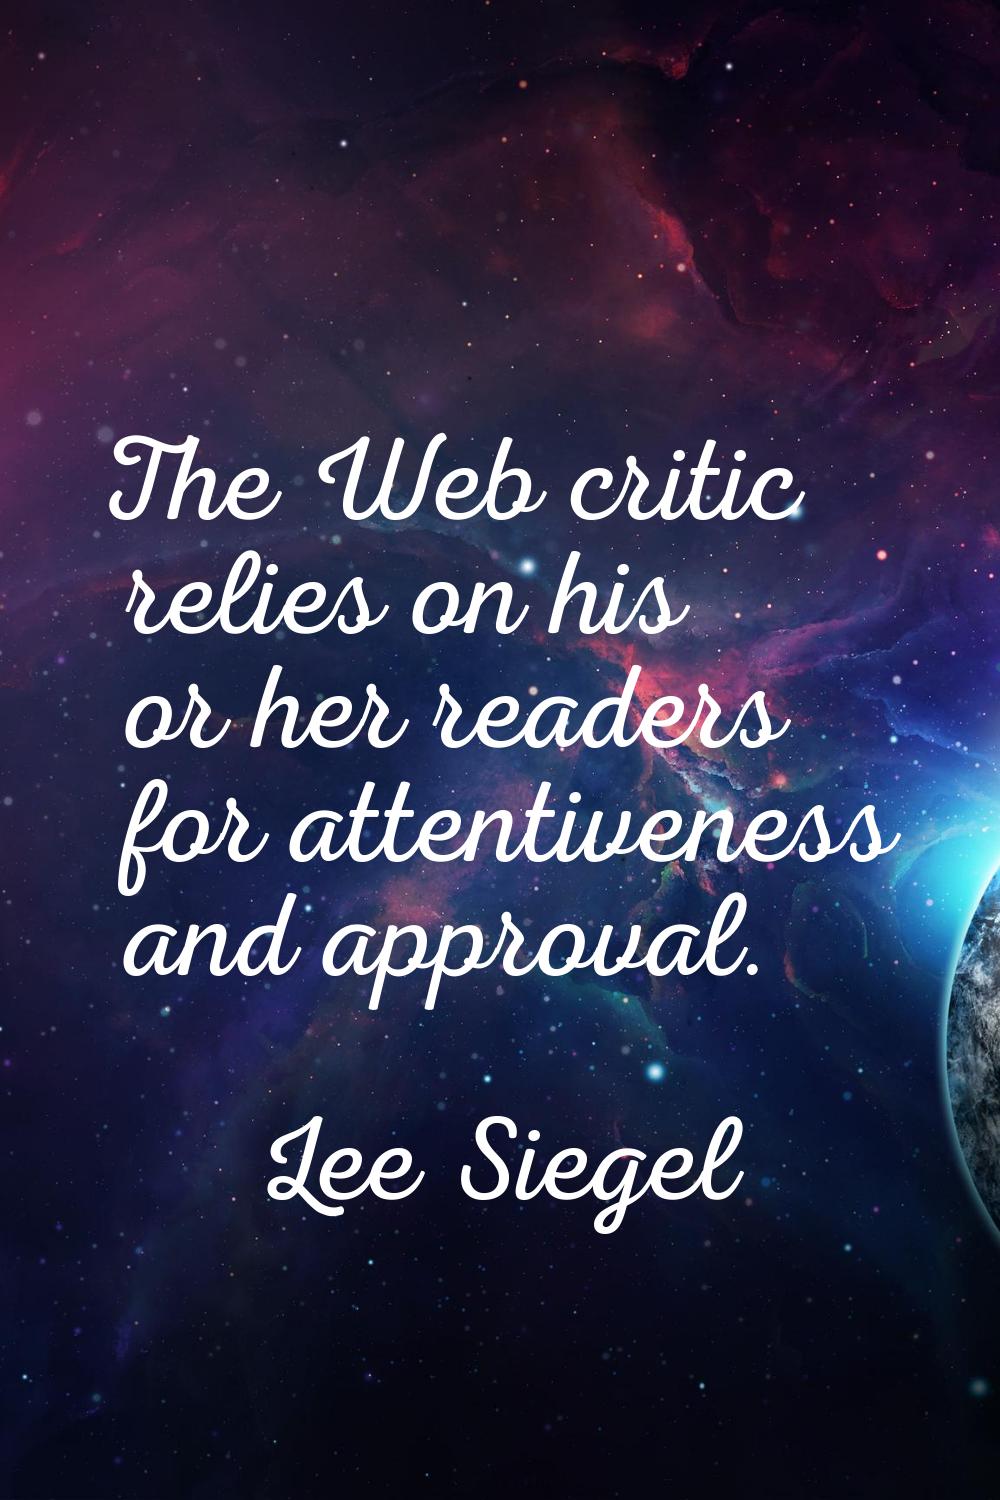 The Web critic relies on his or her readers for attentiveness and approval.